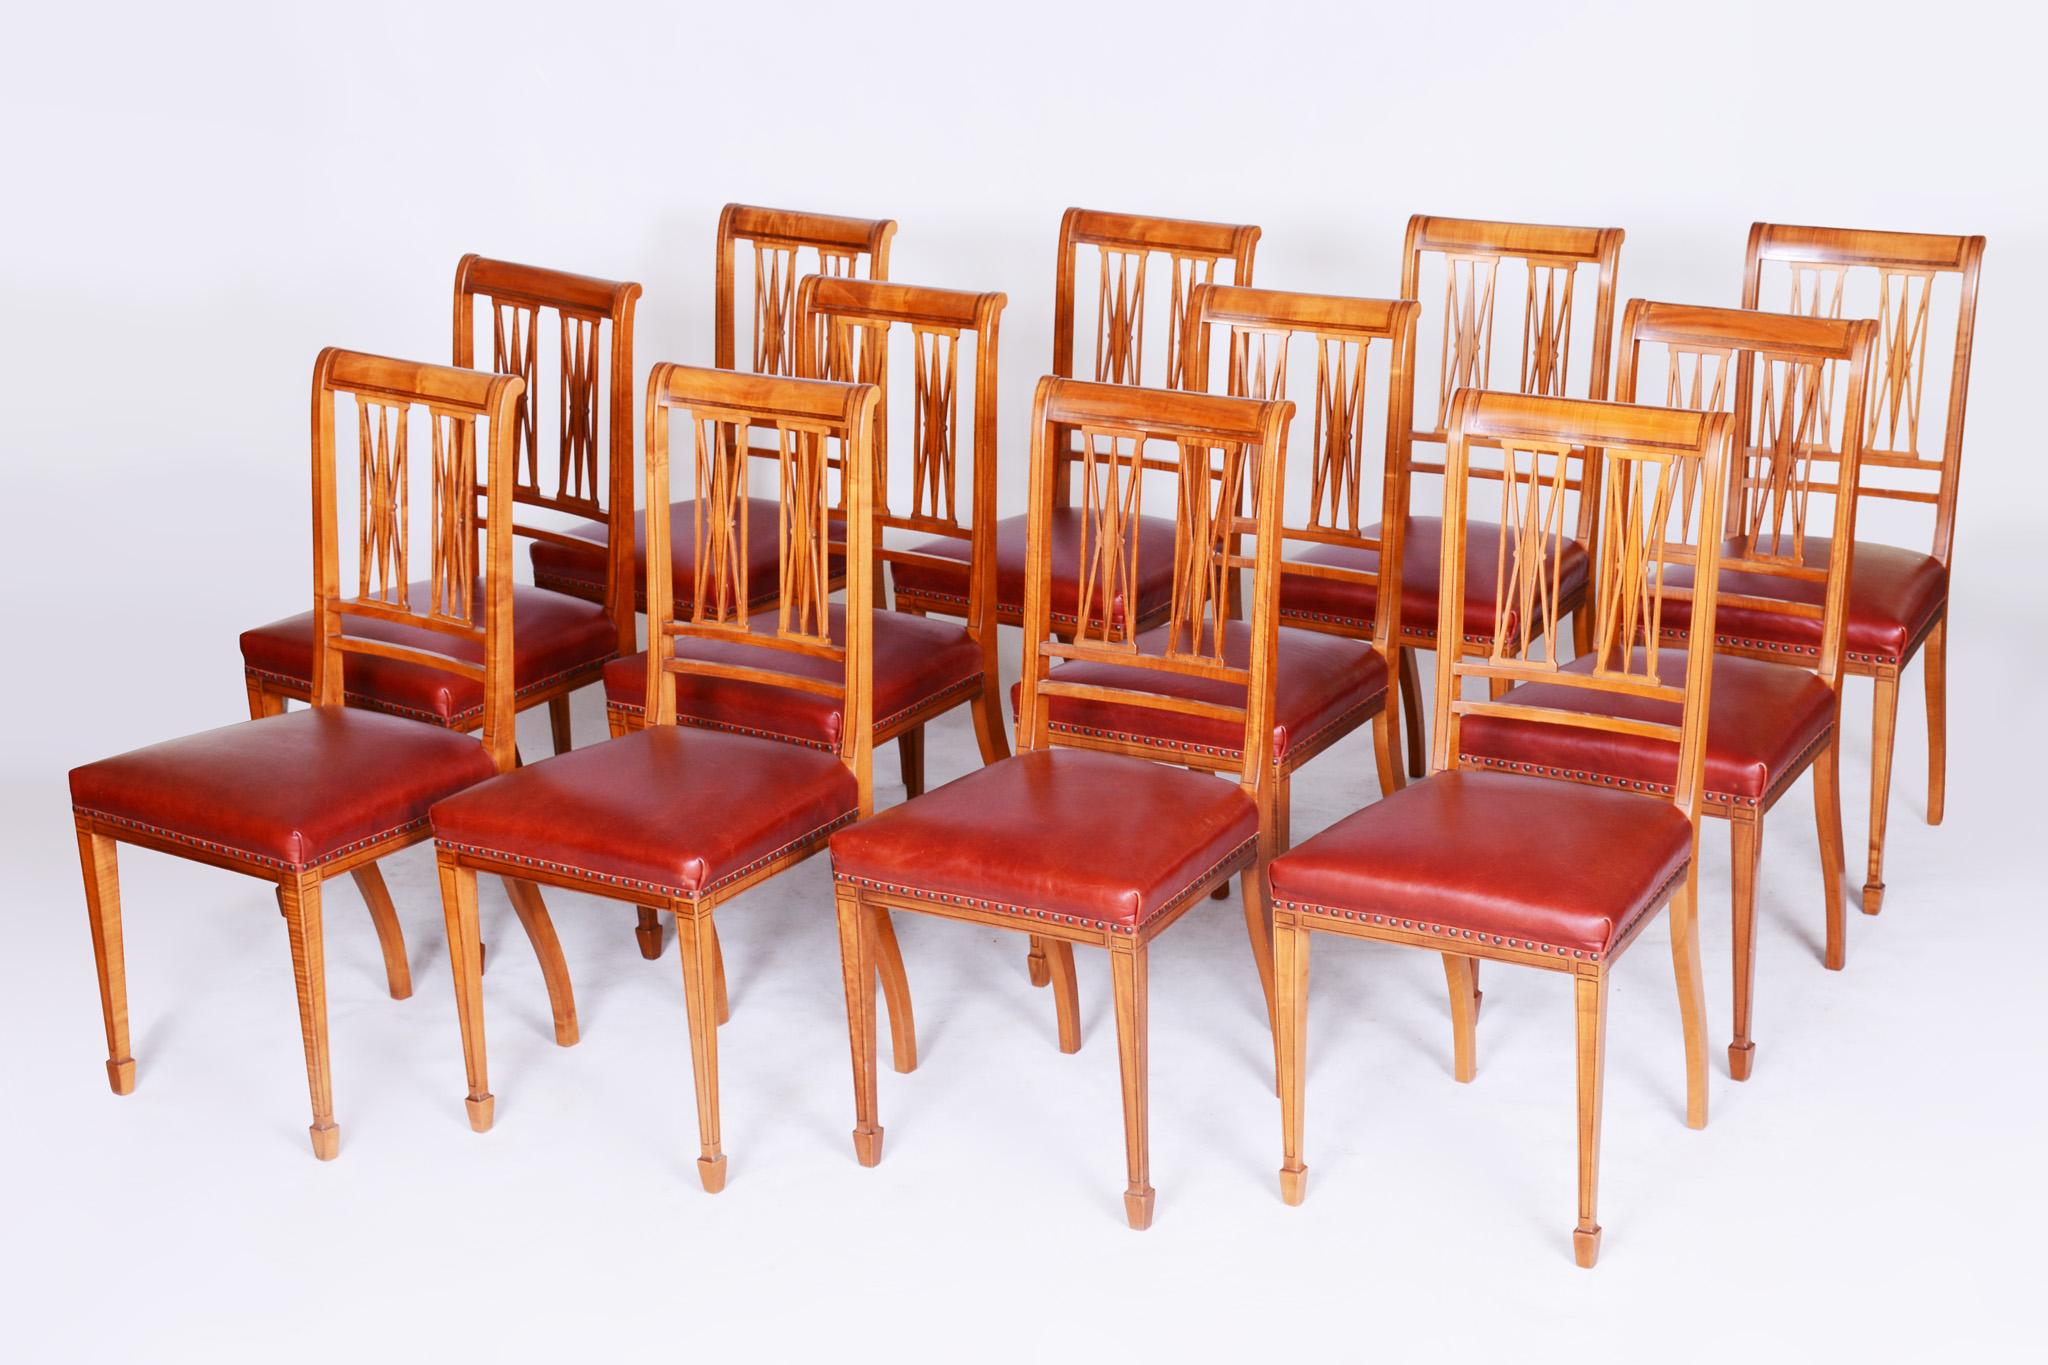 19th Century Original Rare British Dinning Room Set with 12 Chairs, Satin Wood For Sale 4